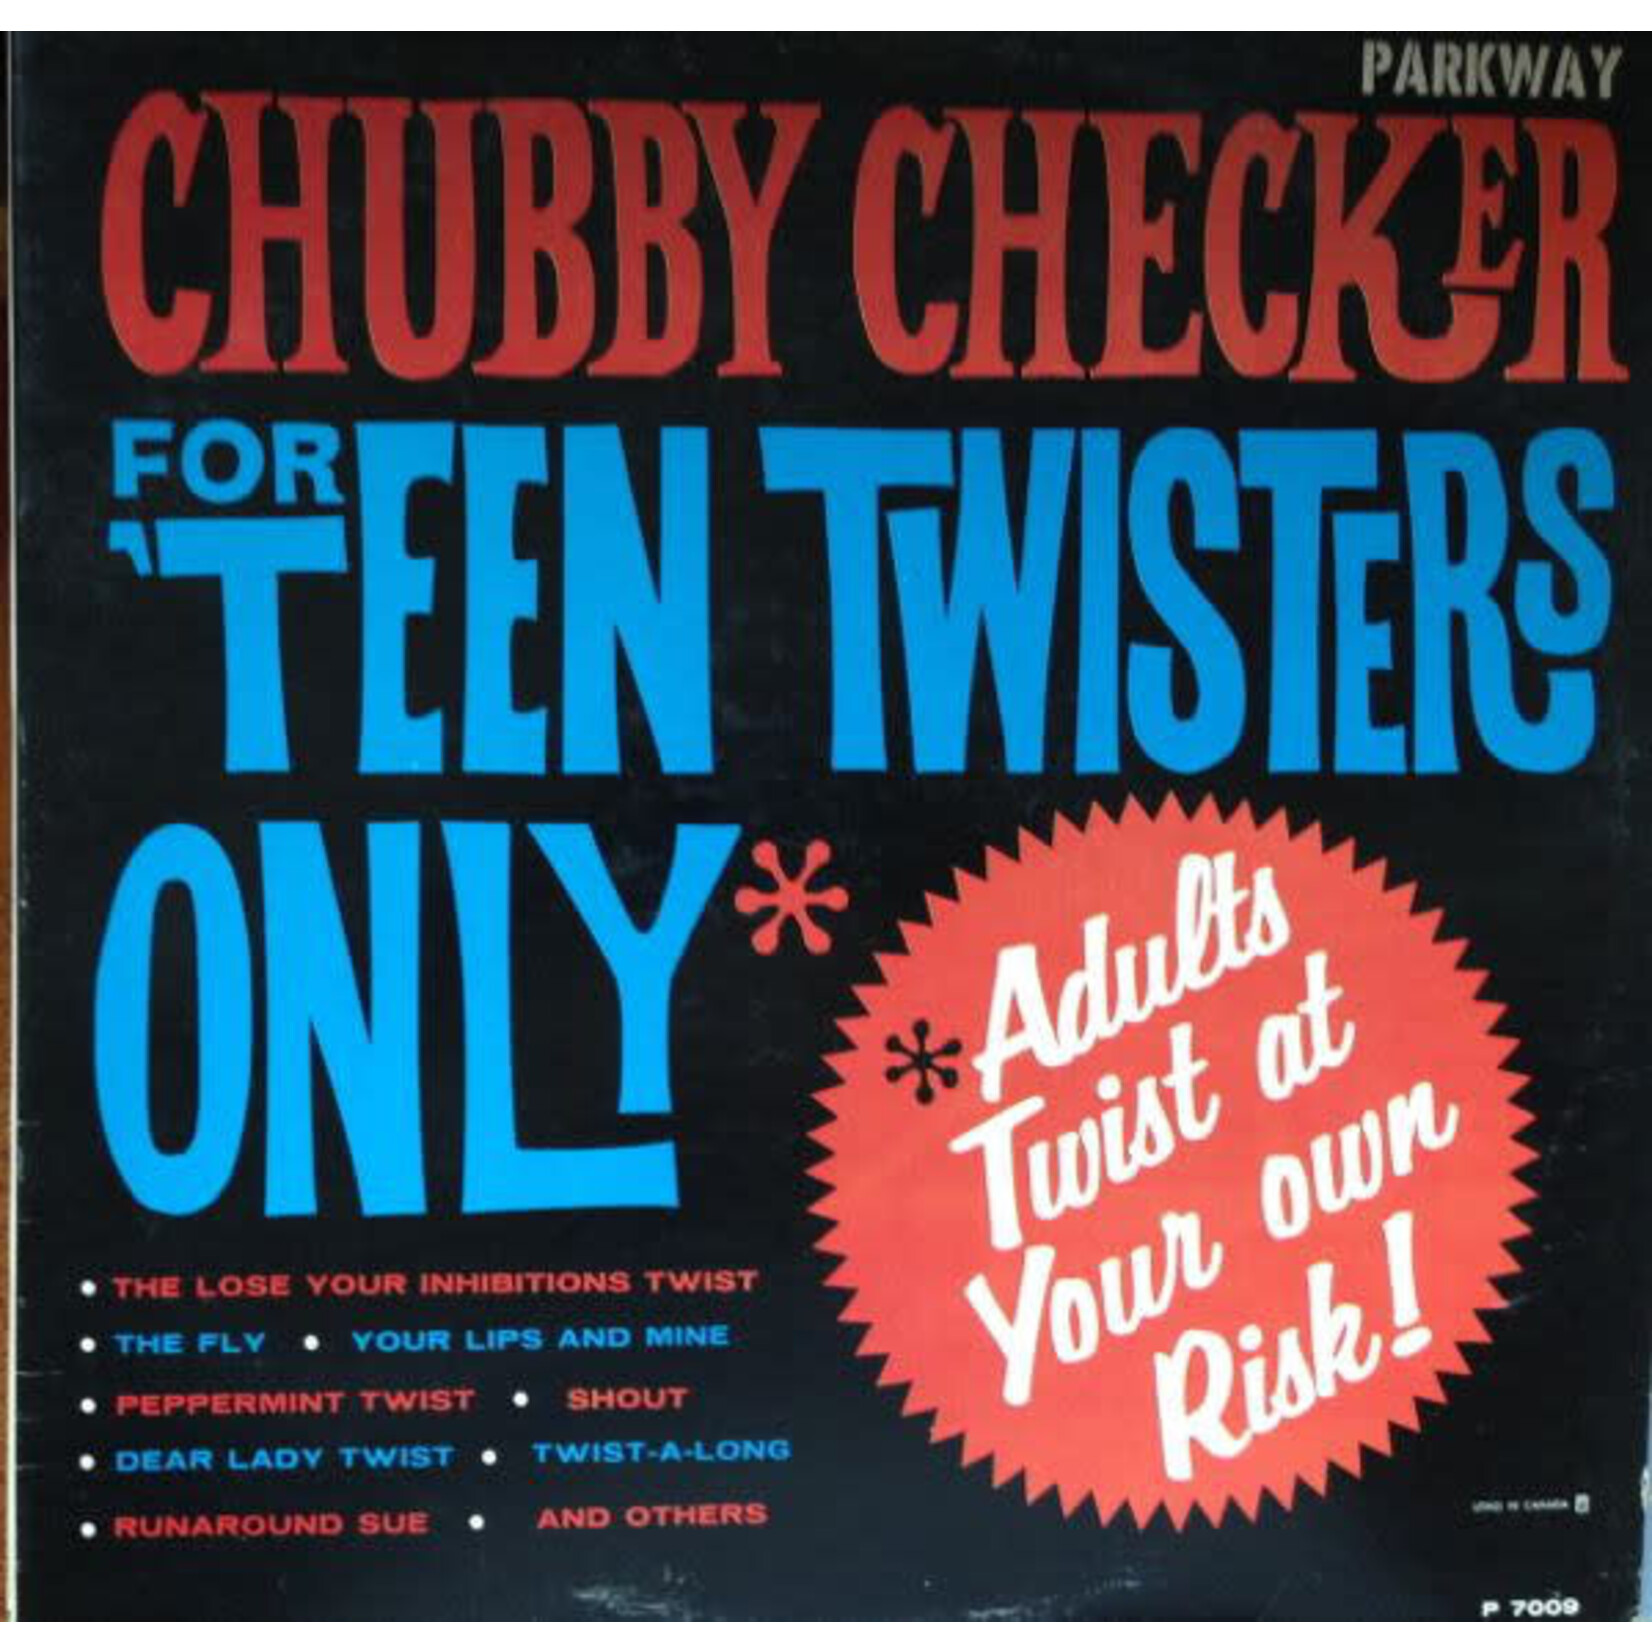 Chubby Checker Chubby Checker - For 'Teen Twisters Only (G, 1962, LP, Parkway – P 7009)